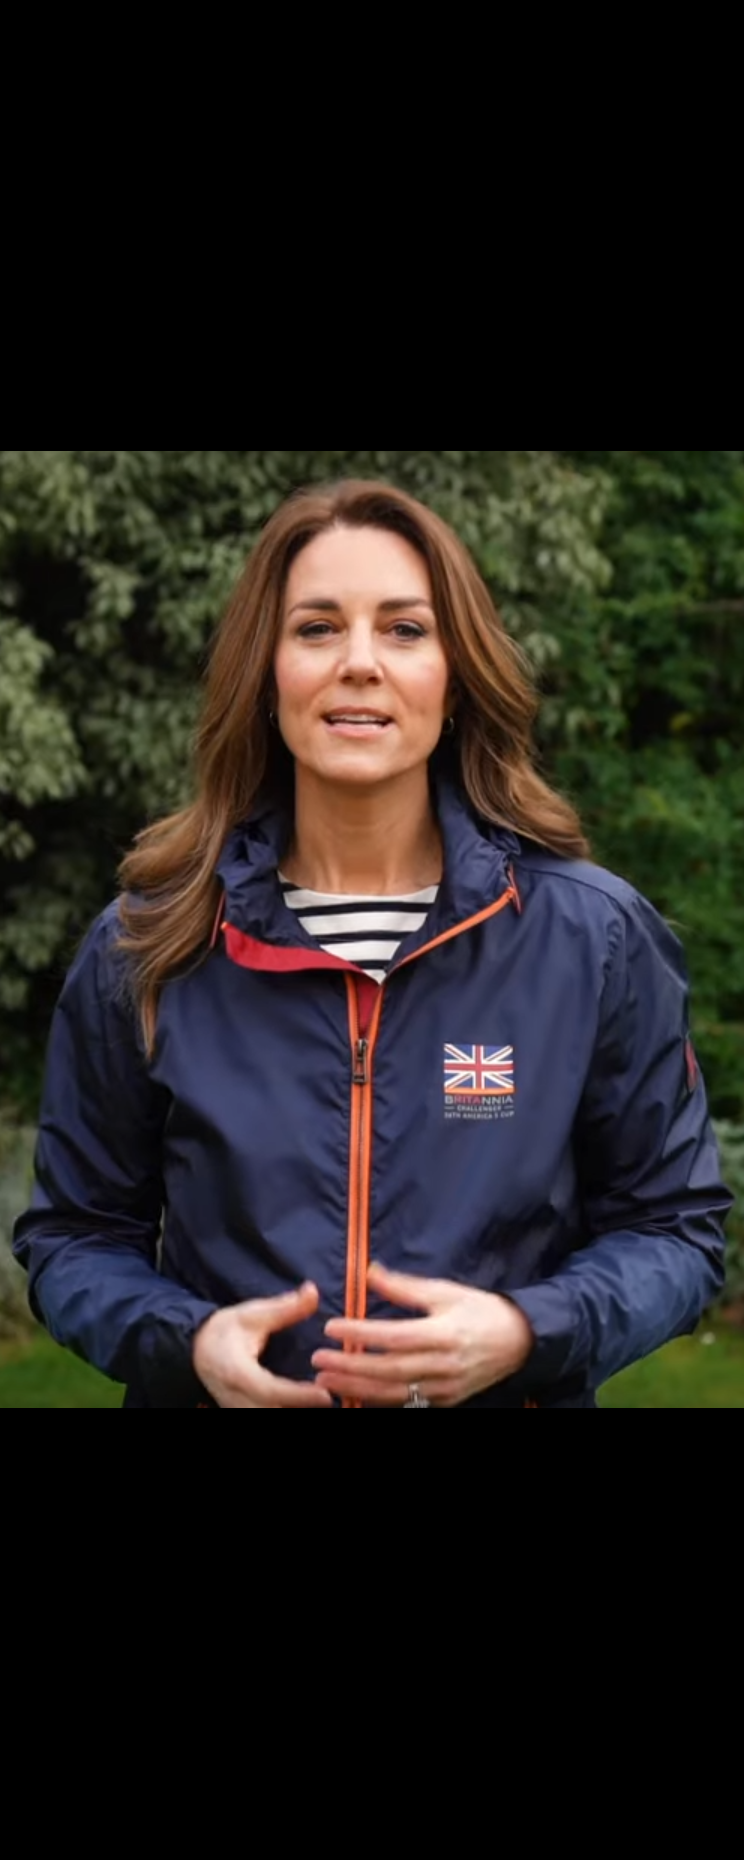 The Duchess of Cambridge records good luck message to INEOS TEAM UK on 15 December 2020